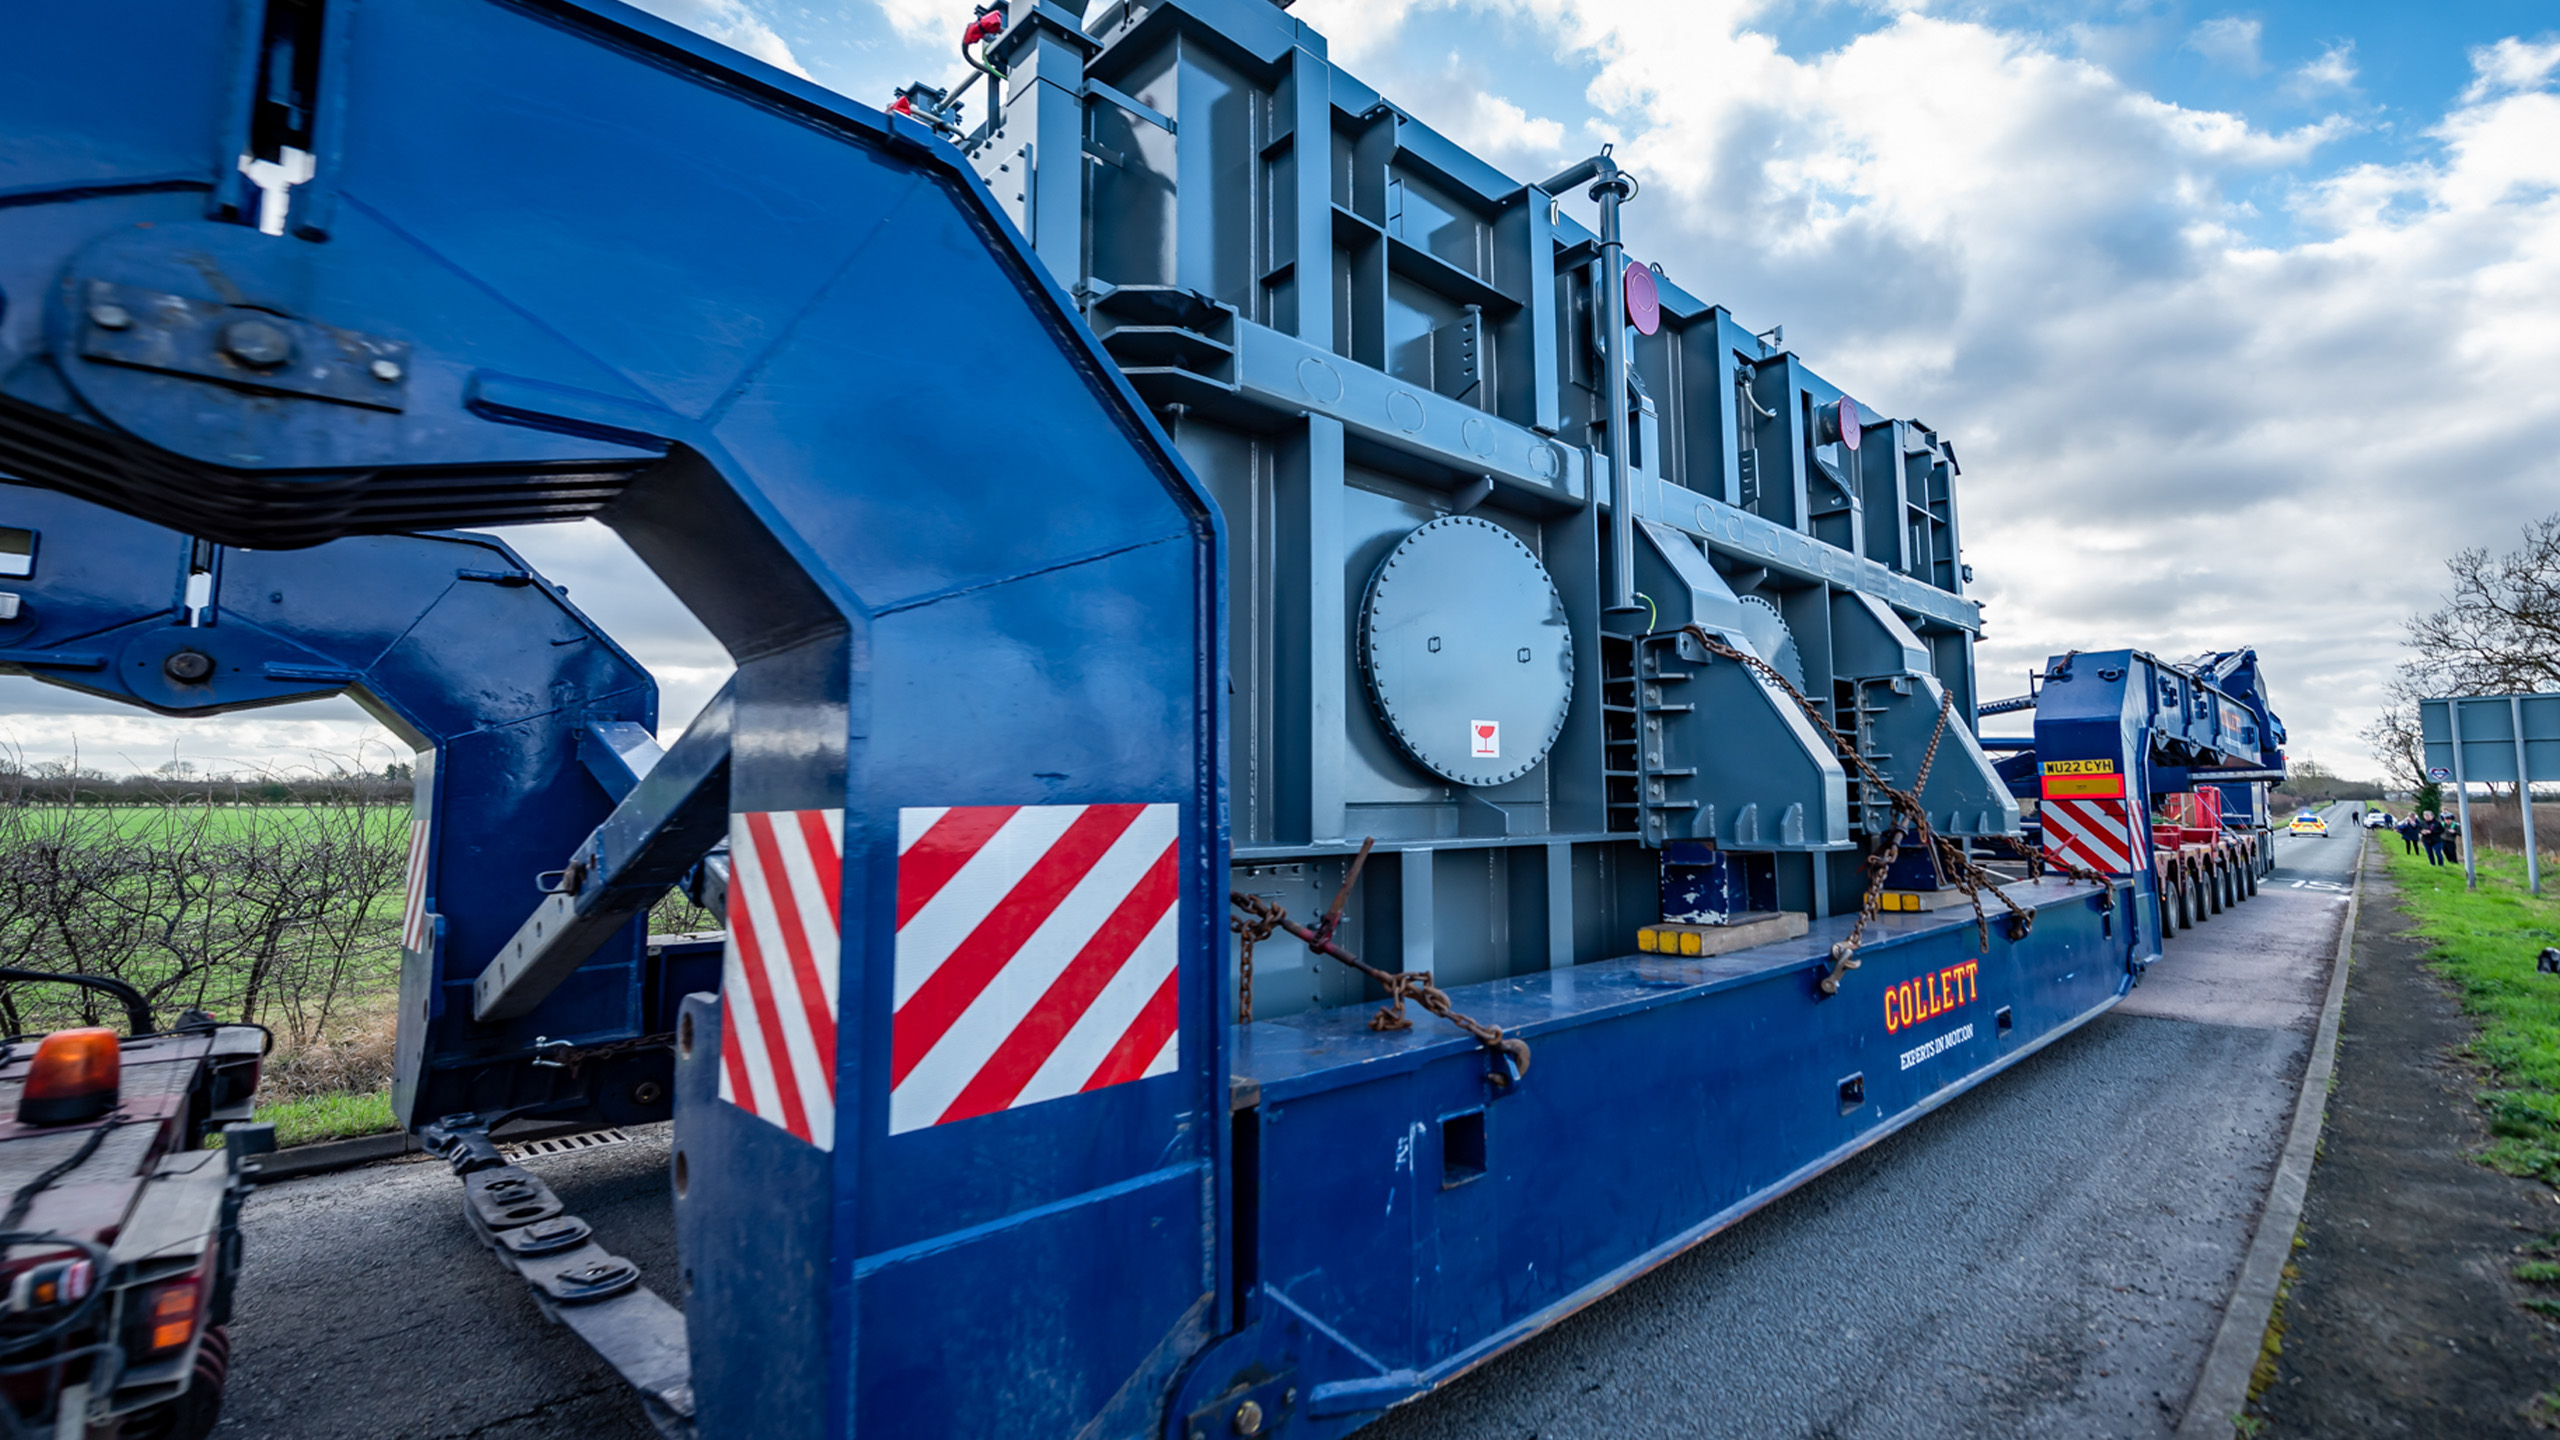 Collett delivers heavy transformers to Biggleswade substation